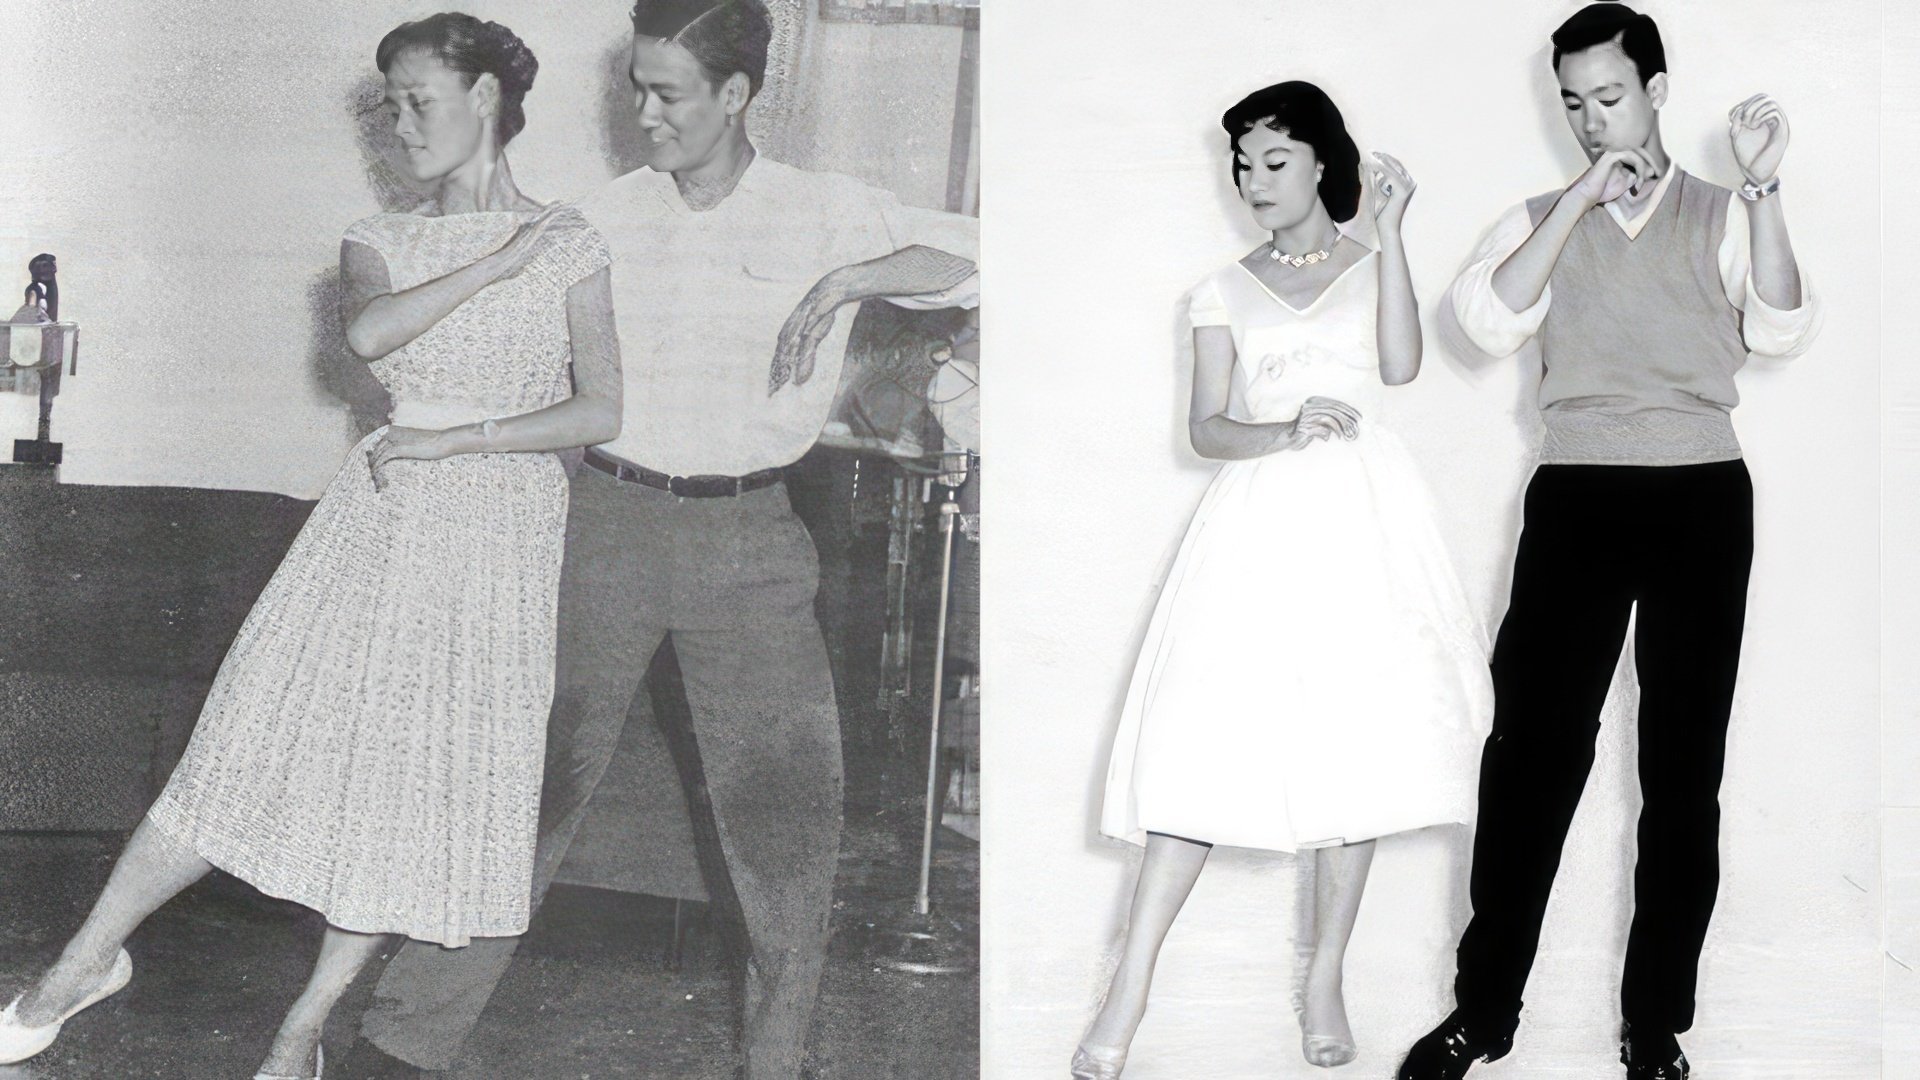 Bruce Lee used to go in for dancing in his youth